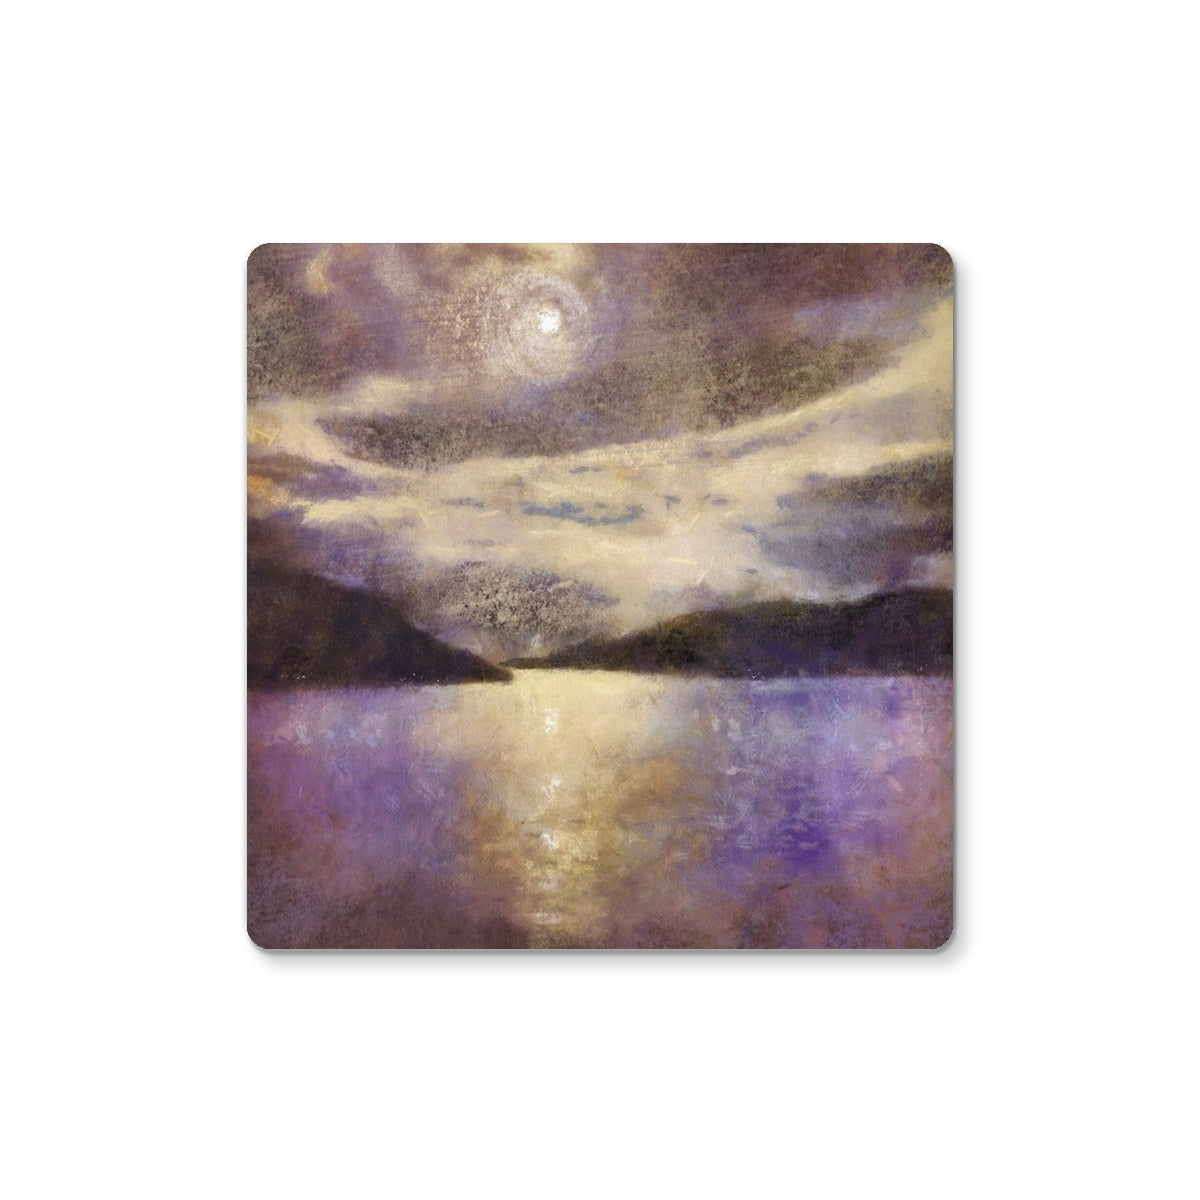 Moonlight Meets Lewis & Harris Art Gifts Coaster-Coasters-Hebridean Islands Art Gallery-Single Coaster-Paintings, Prints, Homeware, Art Gifts From Scotland By Scottish Artist Kevin Hunter